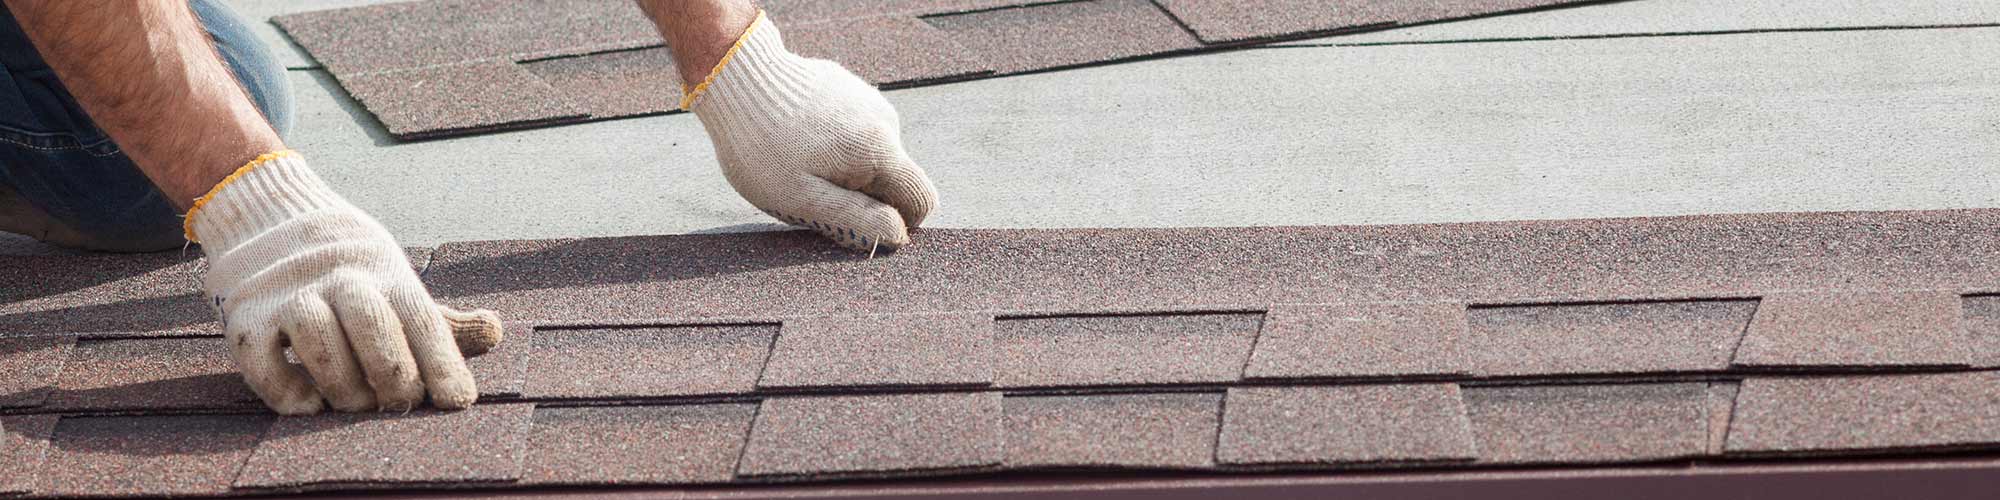 Quality Roofing Materials in Quincy, MA